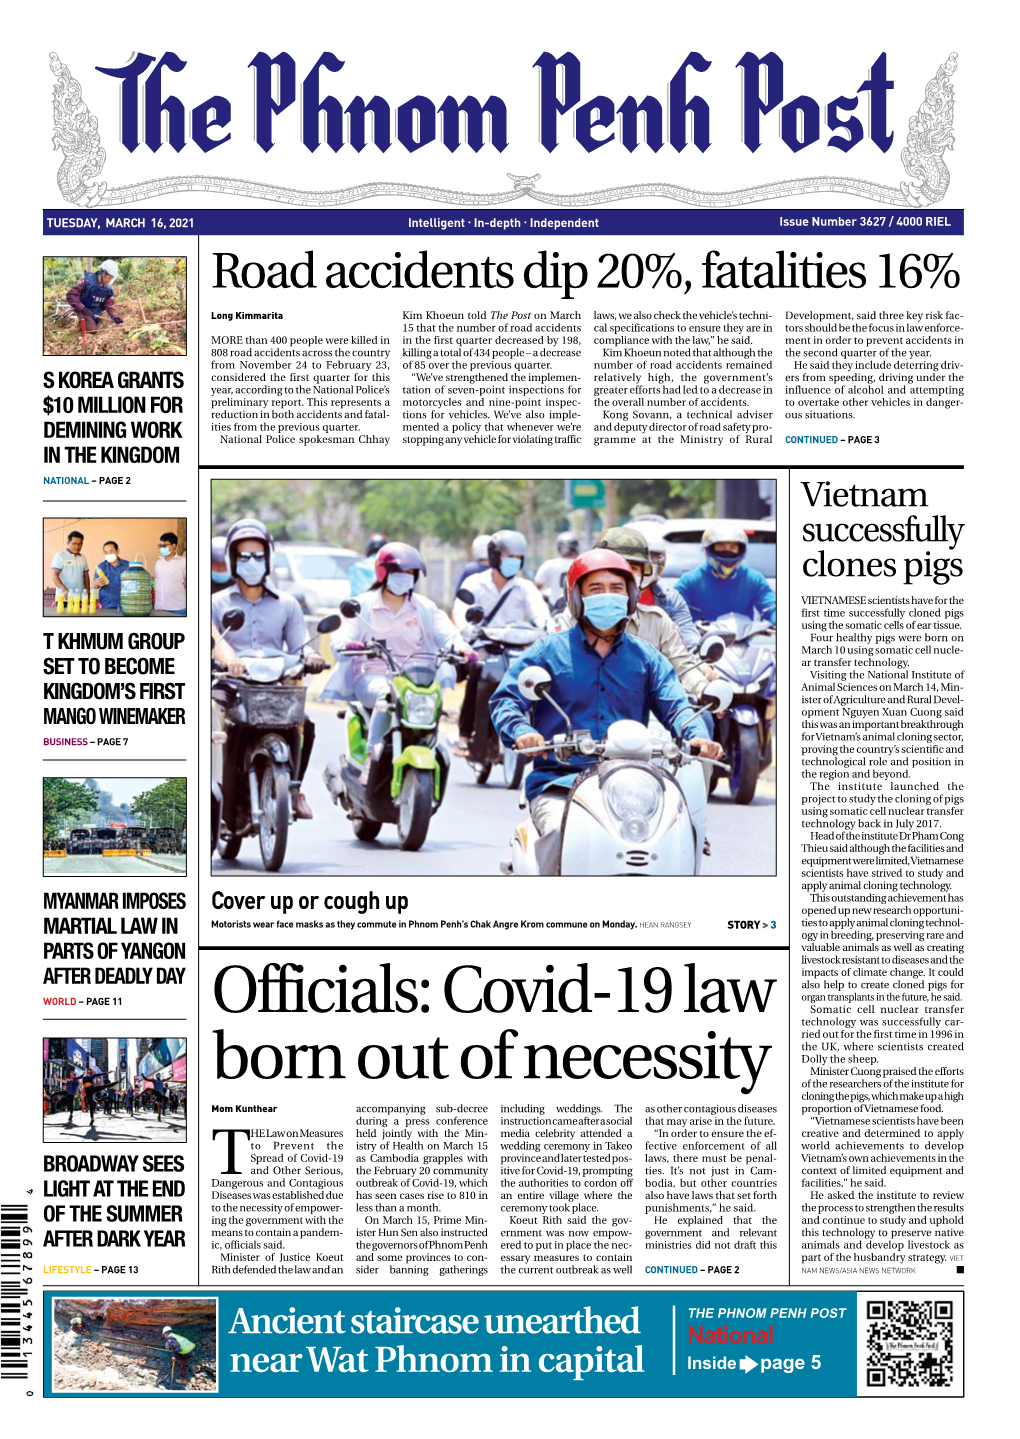 Officials: Covid-19 Law Born out of Necessity